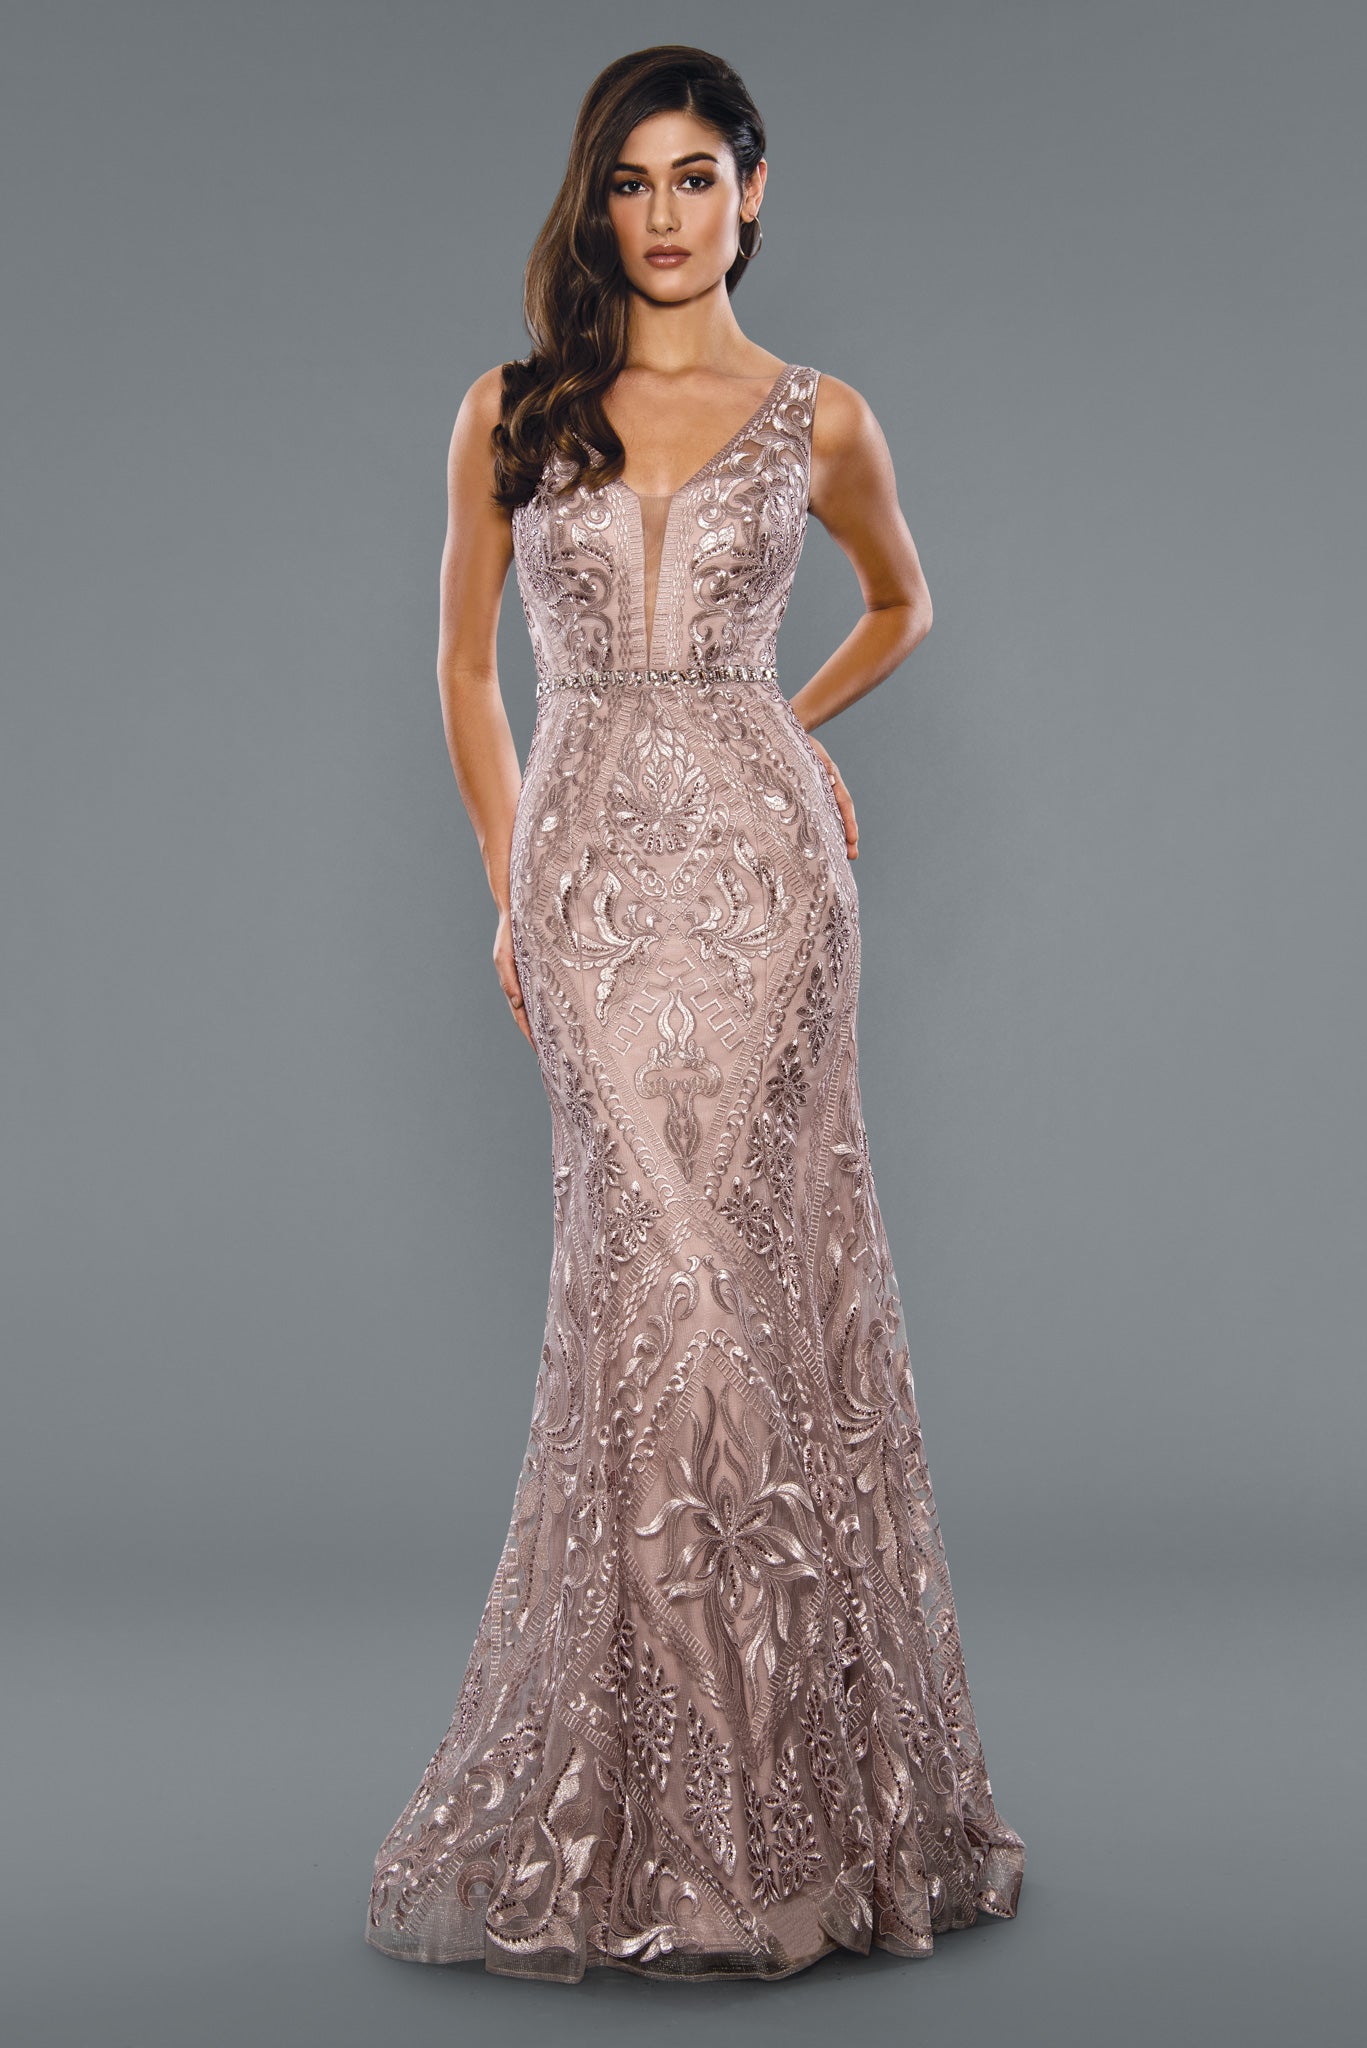 Stella Couture 20032 Long Fitted Shimmer Lace formal prom pageant dress evening gown  Available Sizes: 6-20  Available Colors: Charcoal, Dusty Pink, Navy, Wine